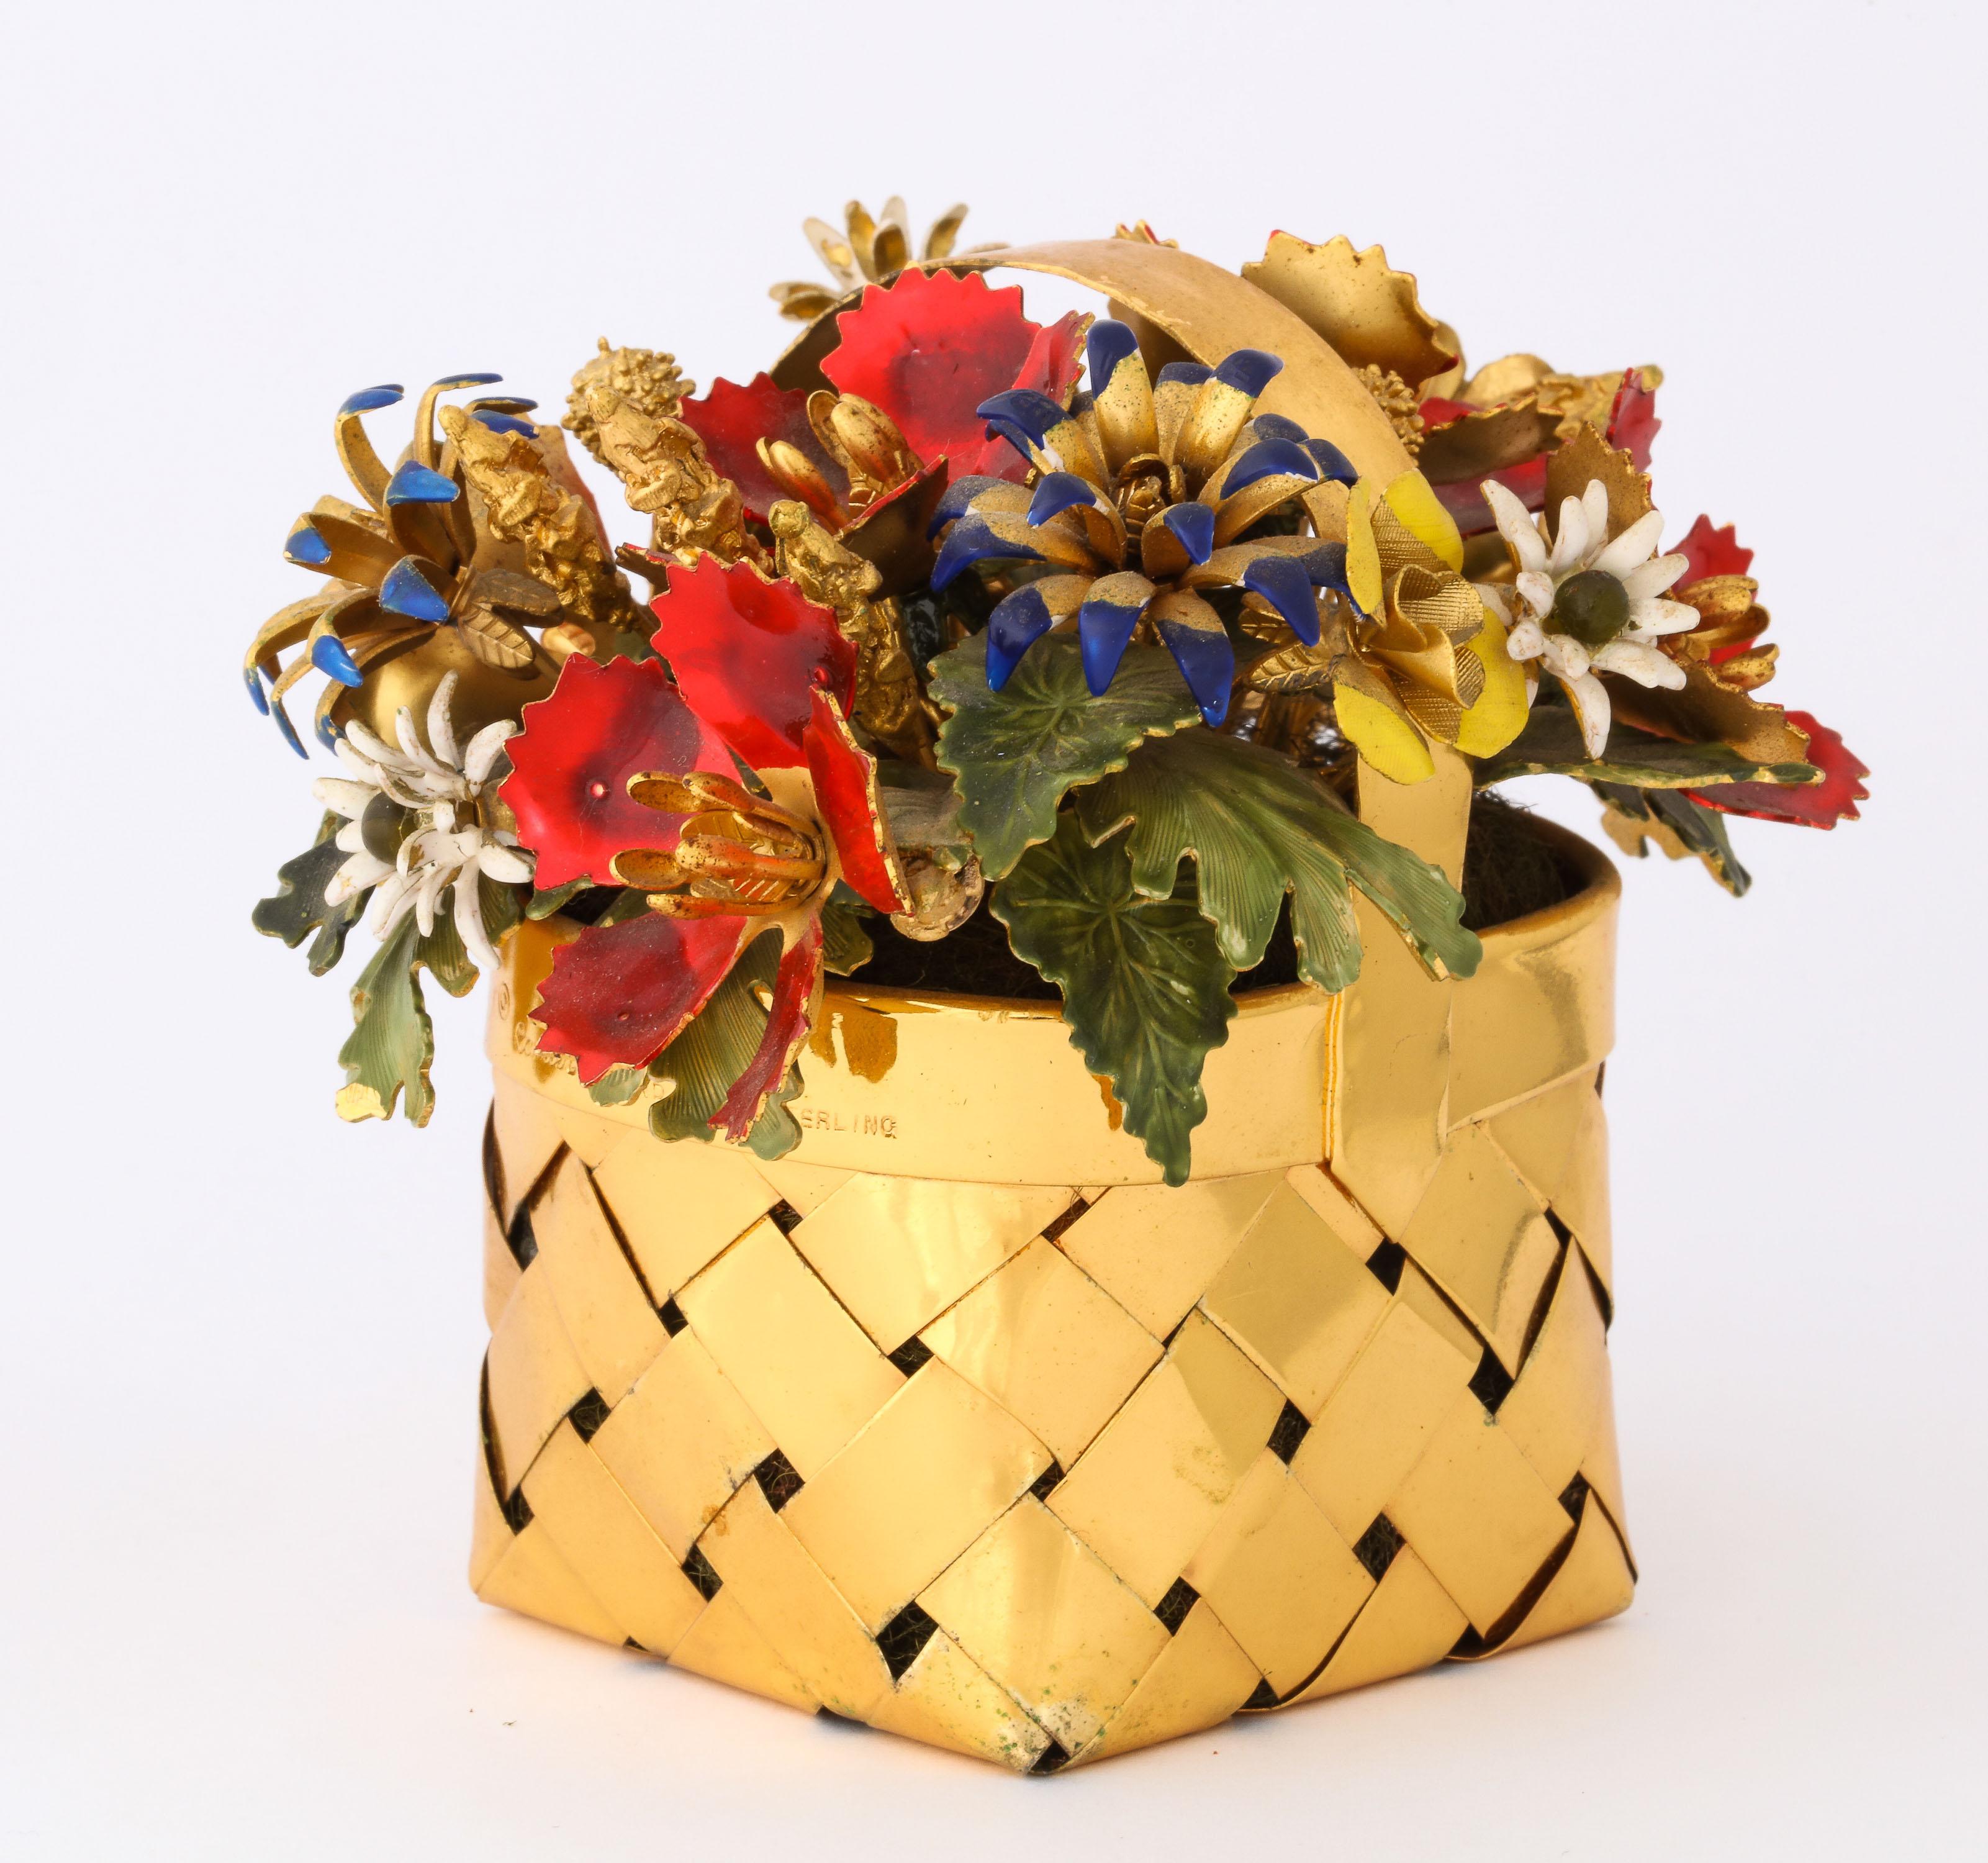 20th Century Sterling Silver-Gilt and Enamel Table Ornament Basket by Cartier